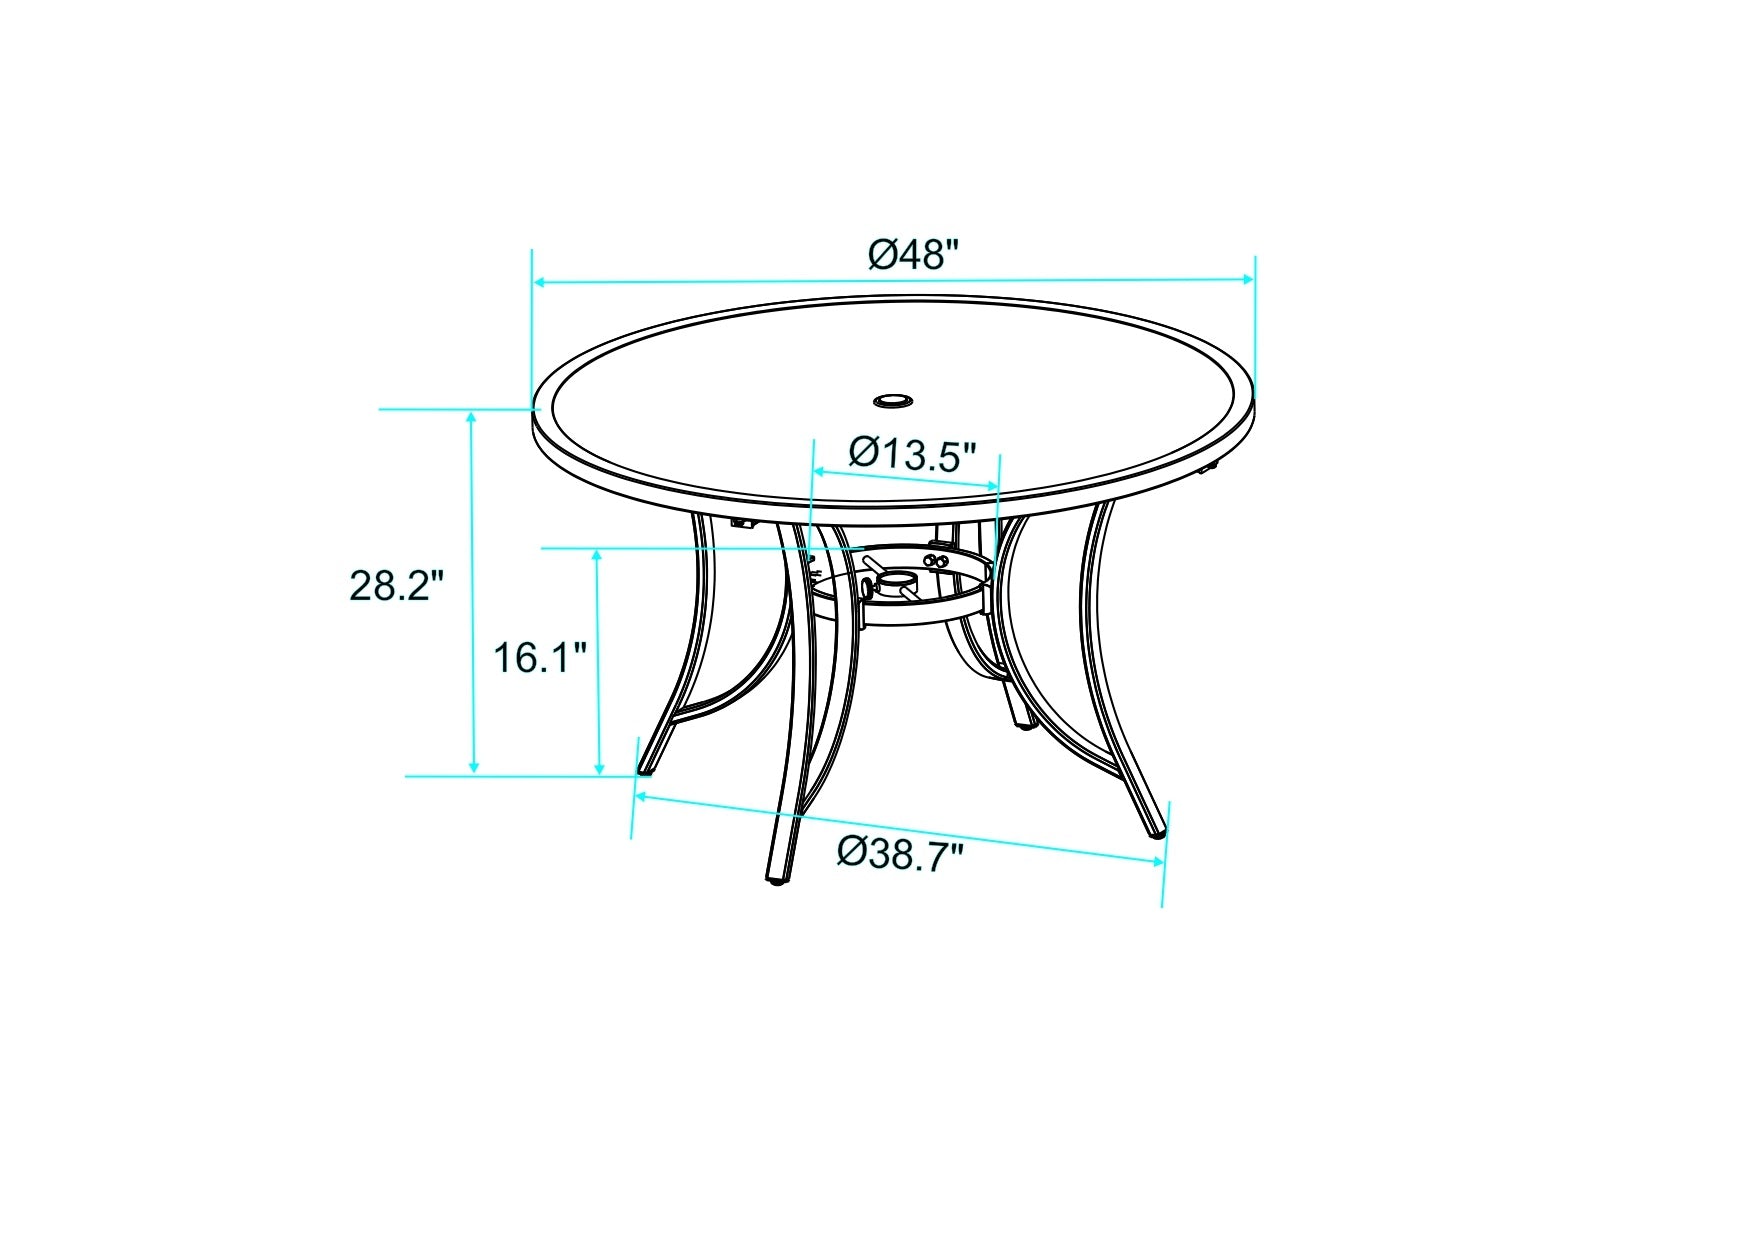 [PICK UP ONLY]Outdoor 5 Piece Dining Set Patio Furniture w/ 4pcs Swivel Chair & 1pc 48inch Tempered Glass Top Table